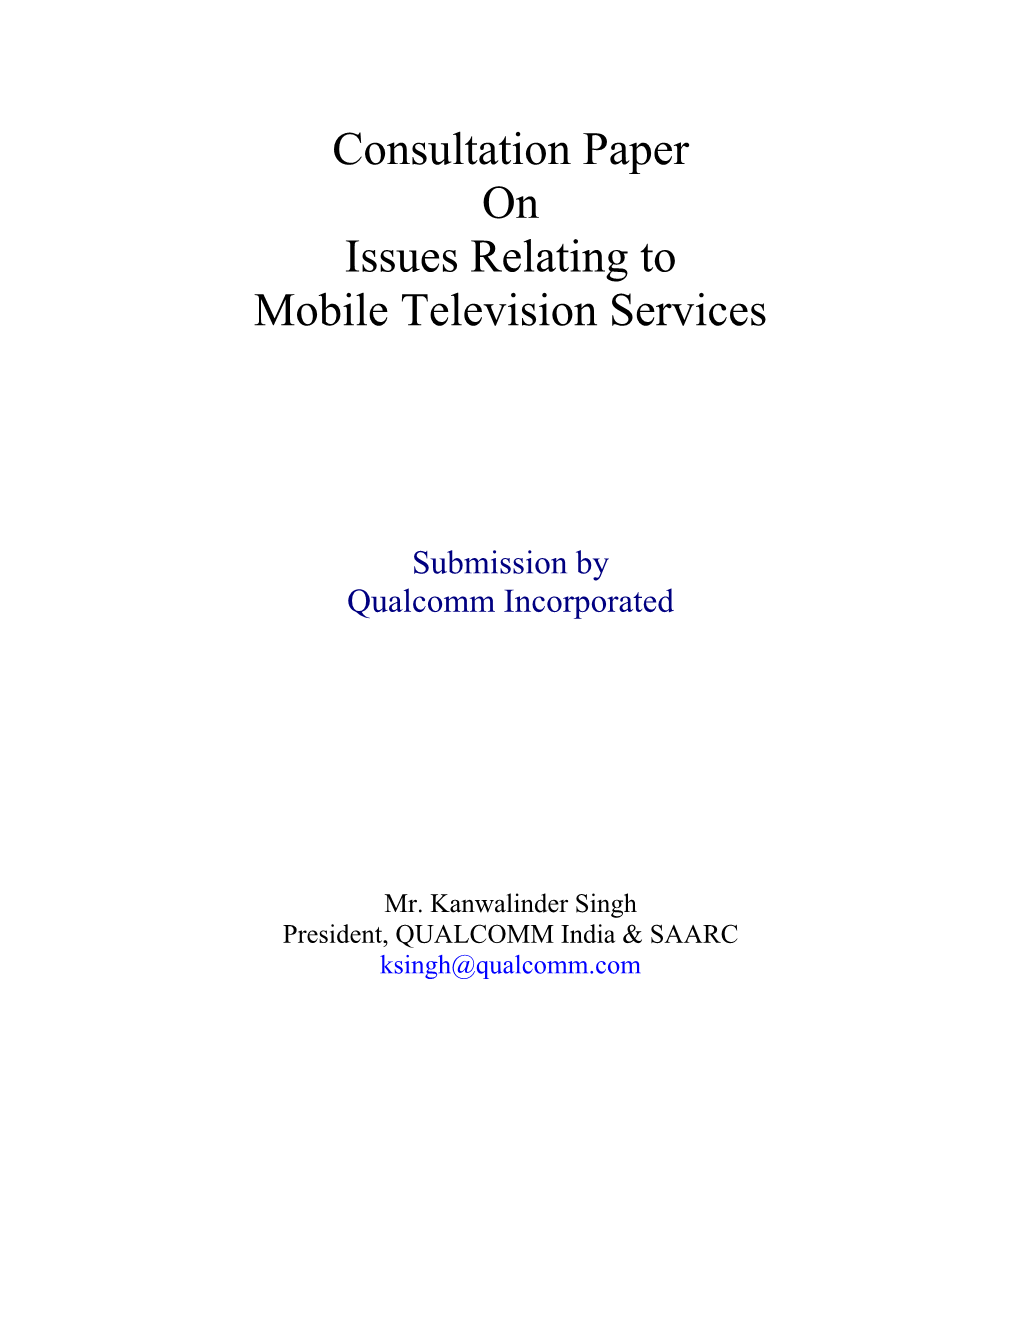 Consultation Paper on Issues Relating to Mobile Television Services